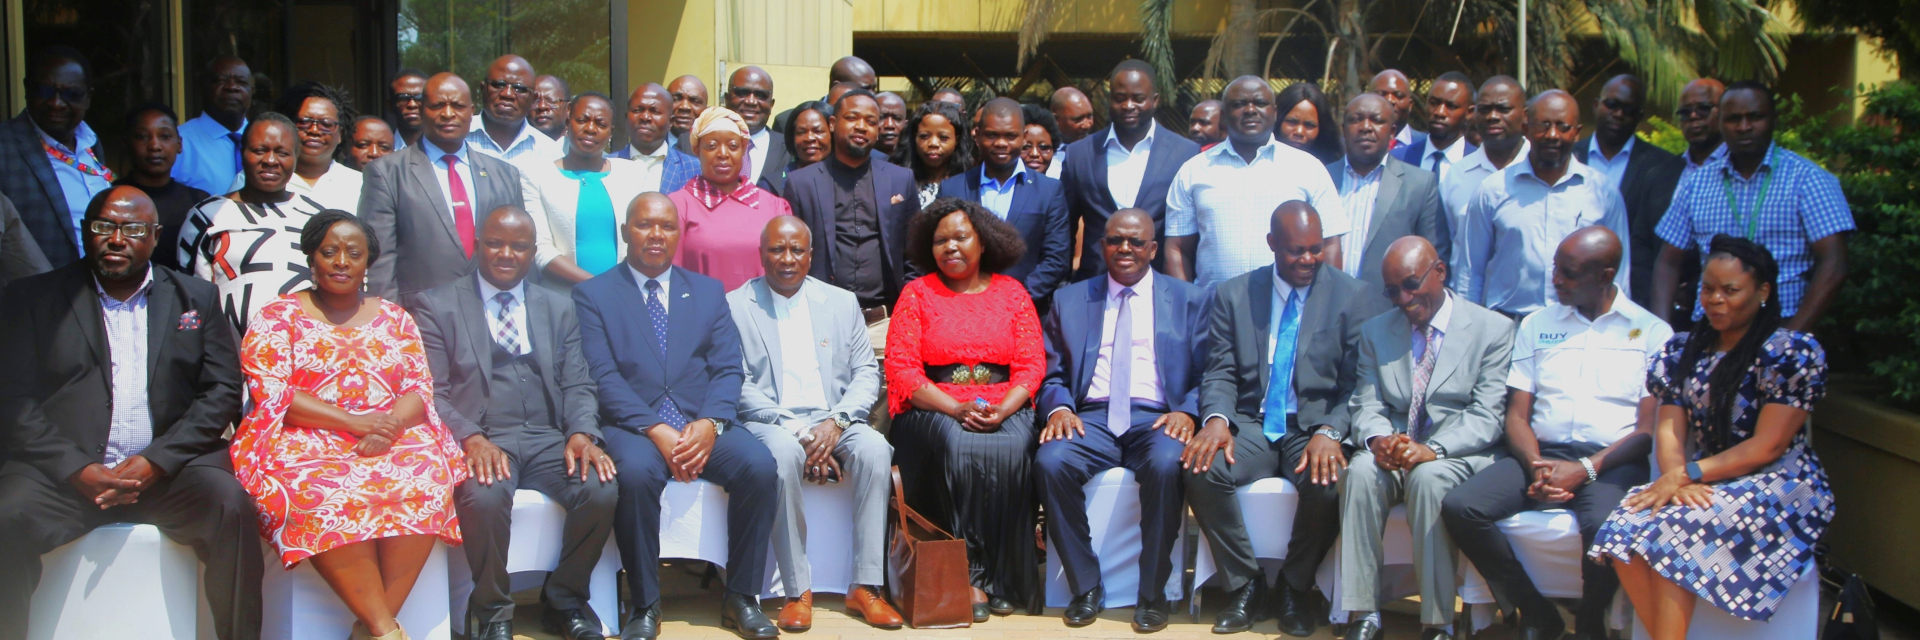 The Ministry of Industry and Commerce holds a Stakeholder Validation Workshop on the Draft Zimbabwe National Industrial Development Policy (ZNIDP).